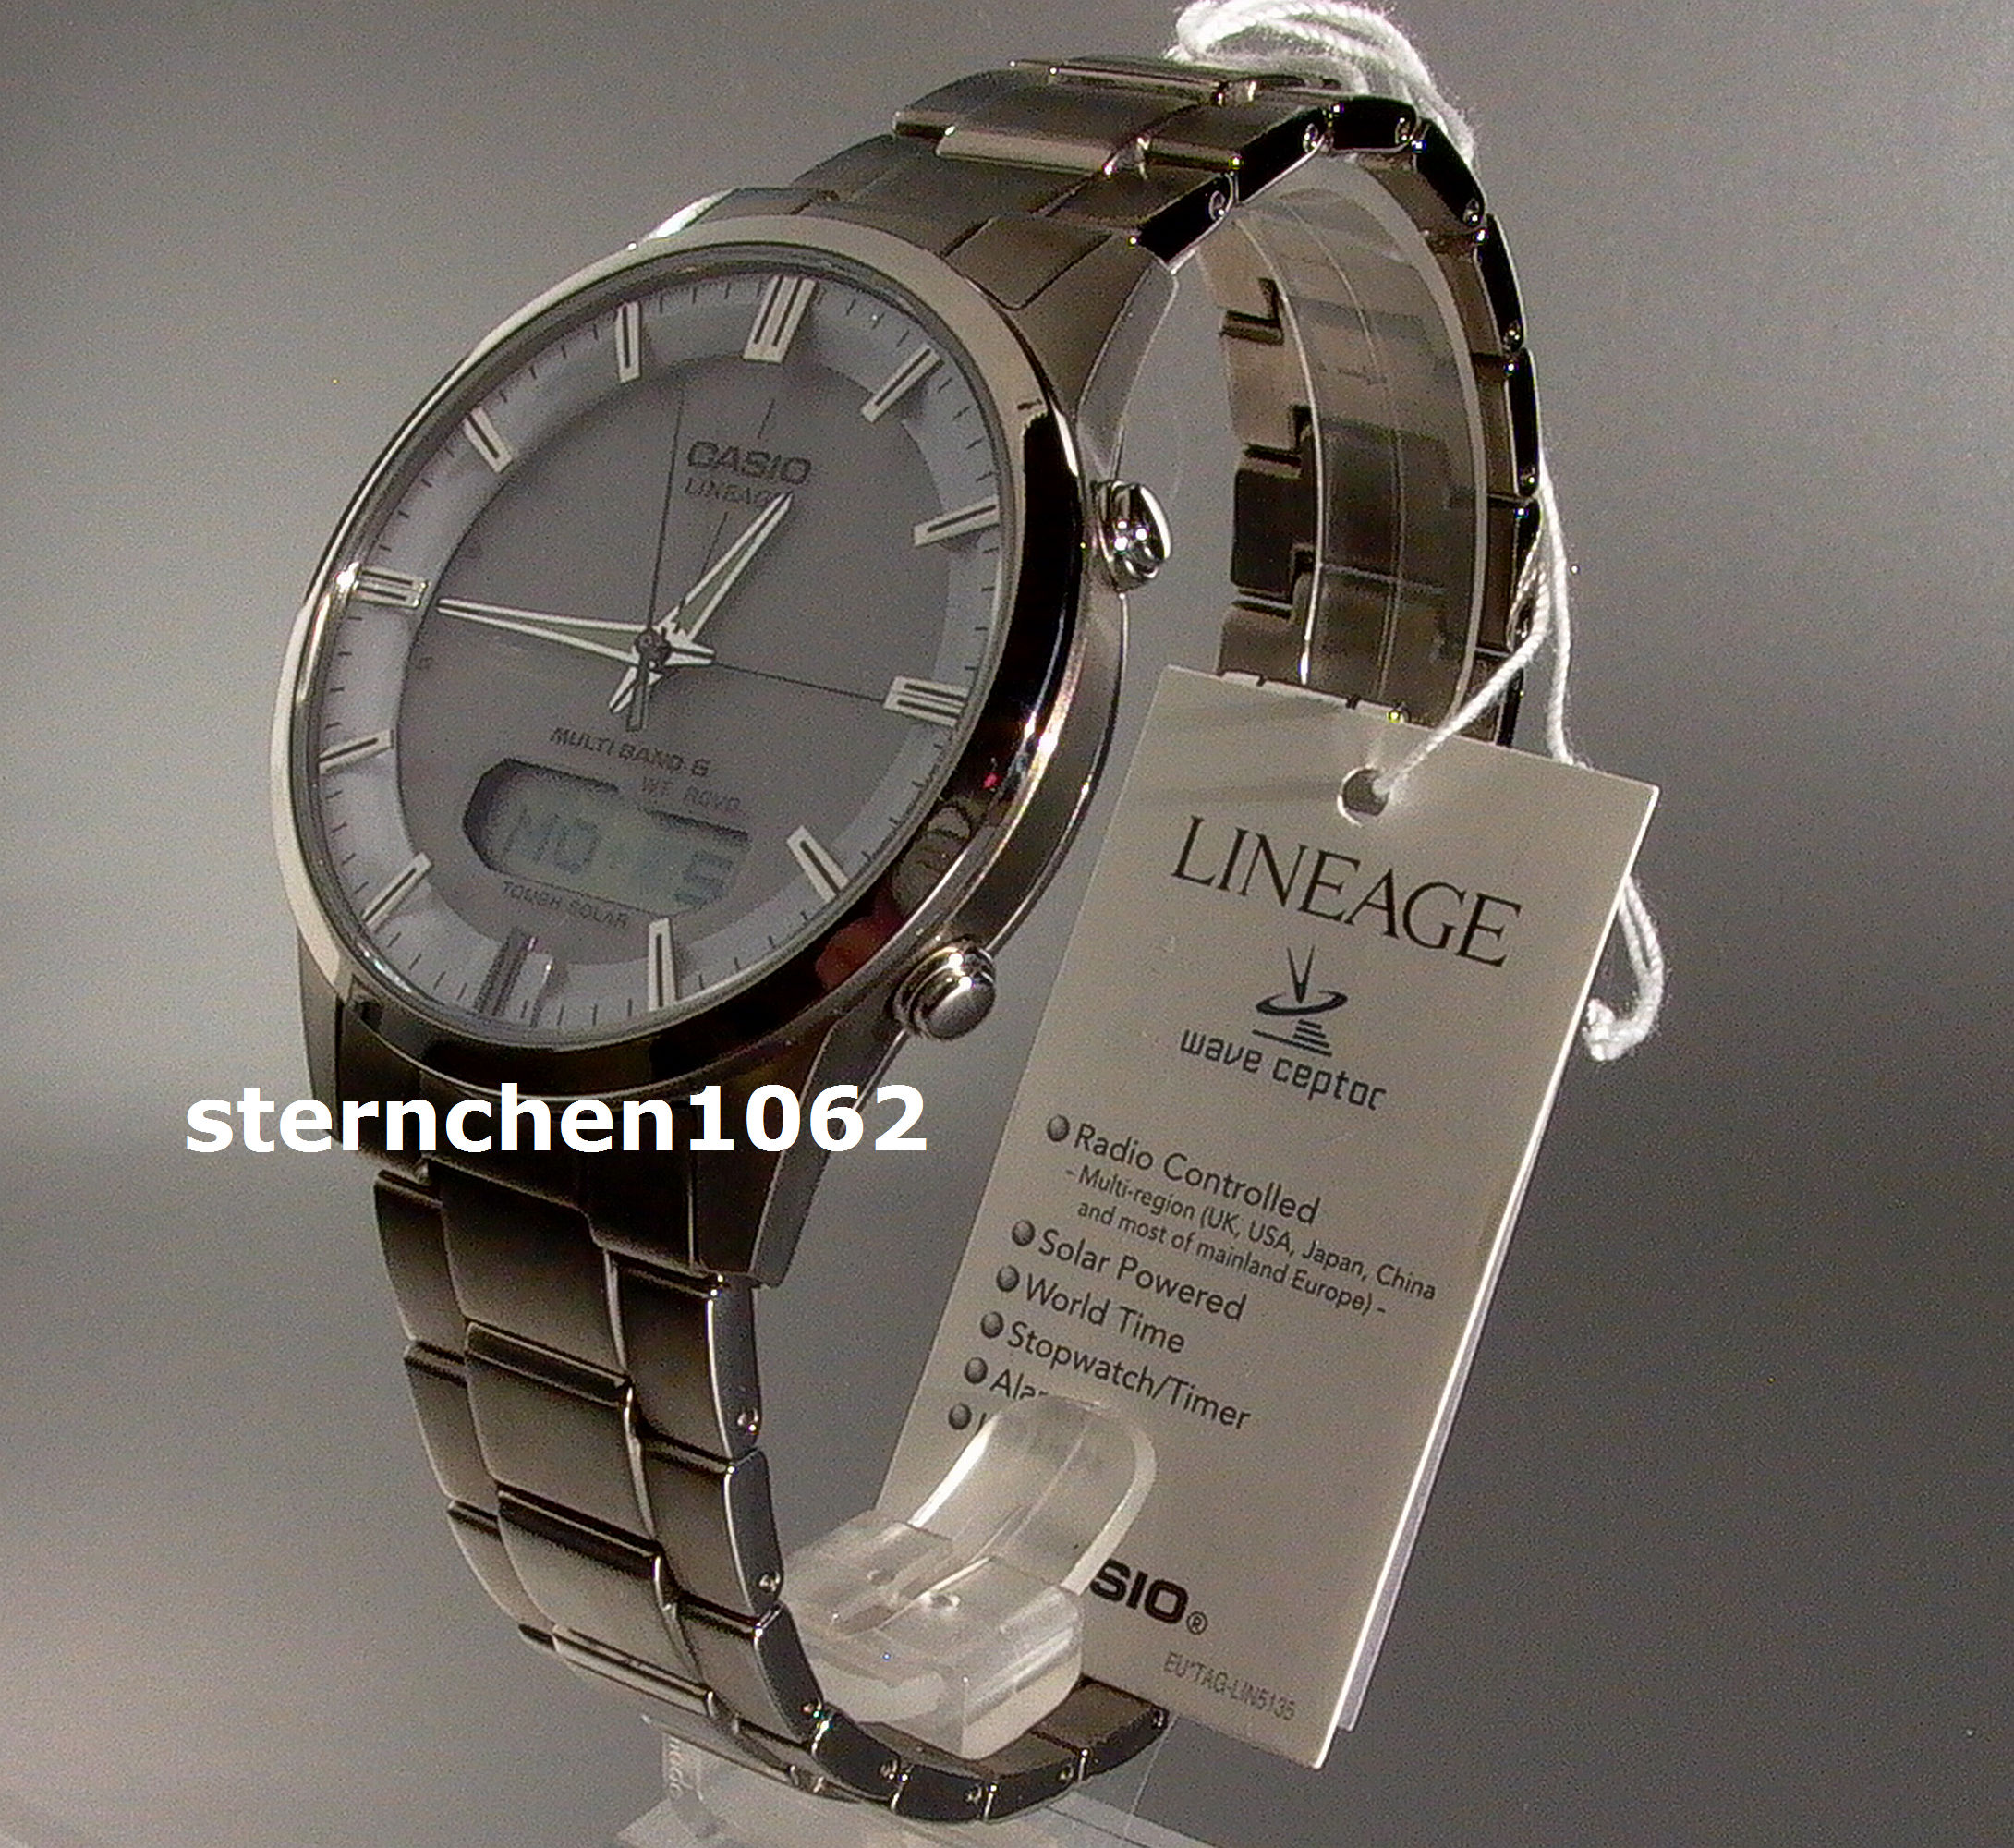 Sternchen 1062 - Lineage LCW-M170TD-7AER * controlled * * Titan